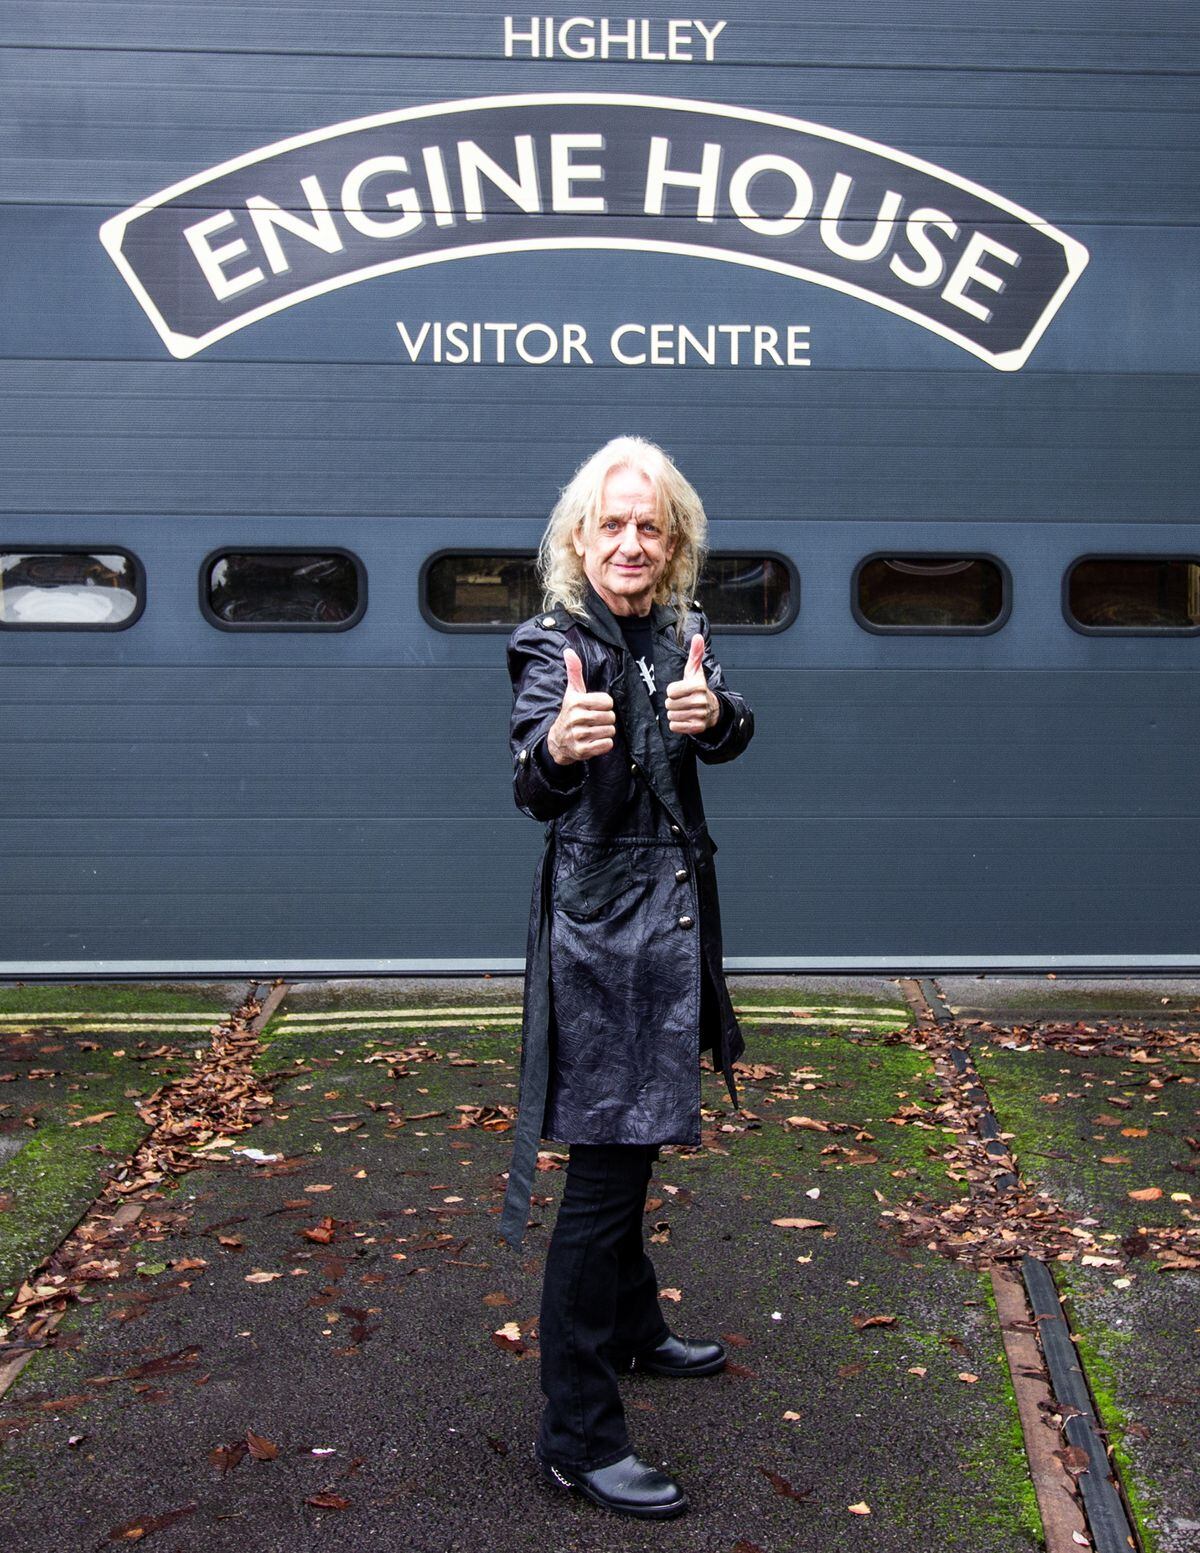 KK Downing at the Engine House at Severn Valley Railway